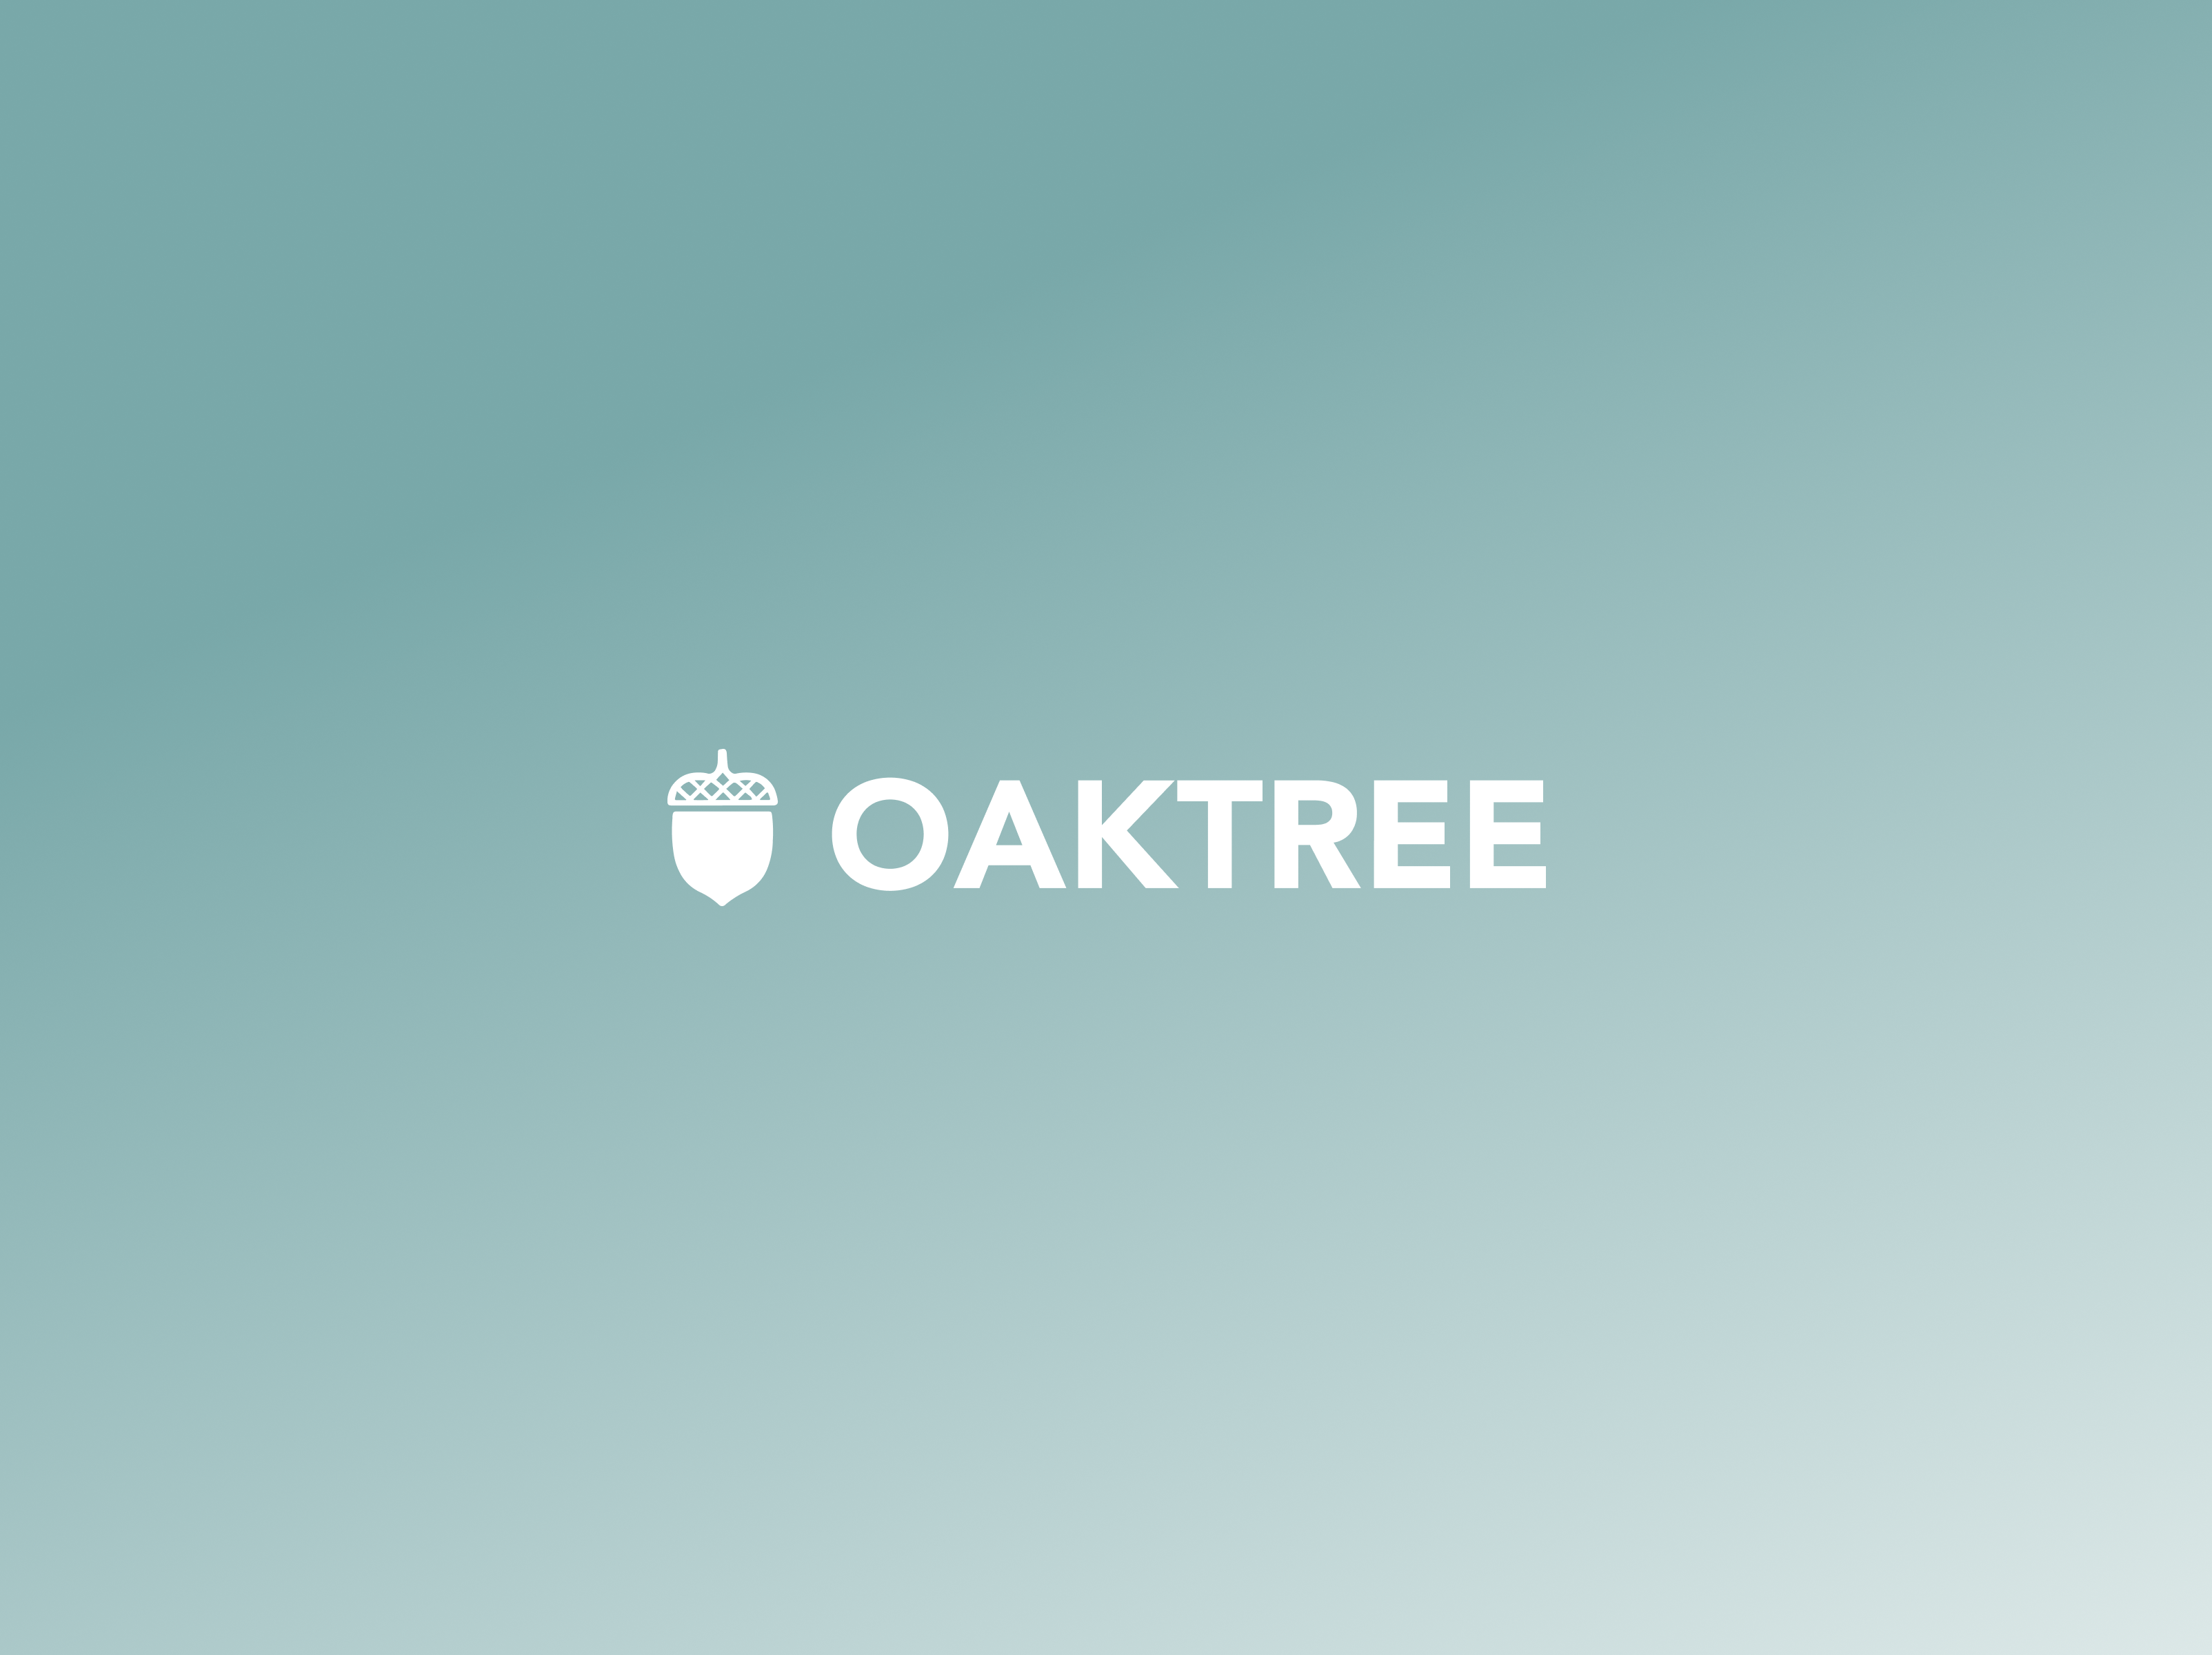 A preview browser image of the website of a cybersecurity consulting company called OAKTREE.